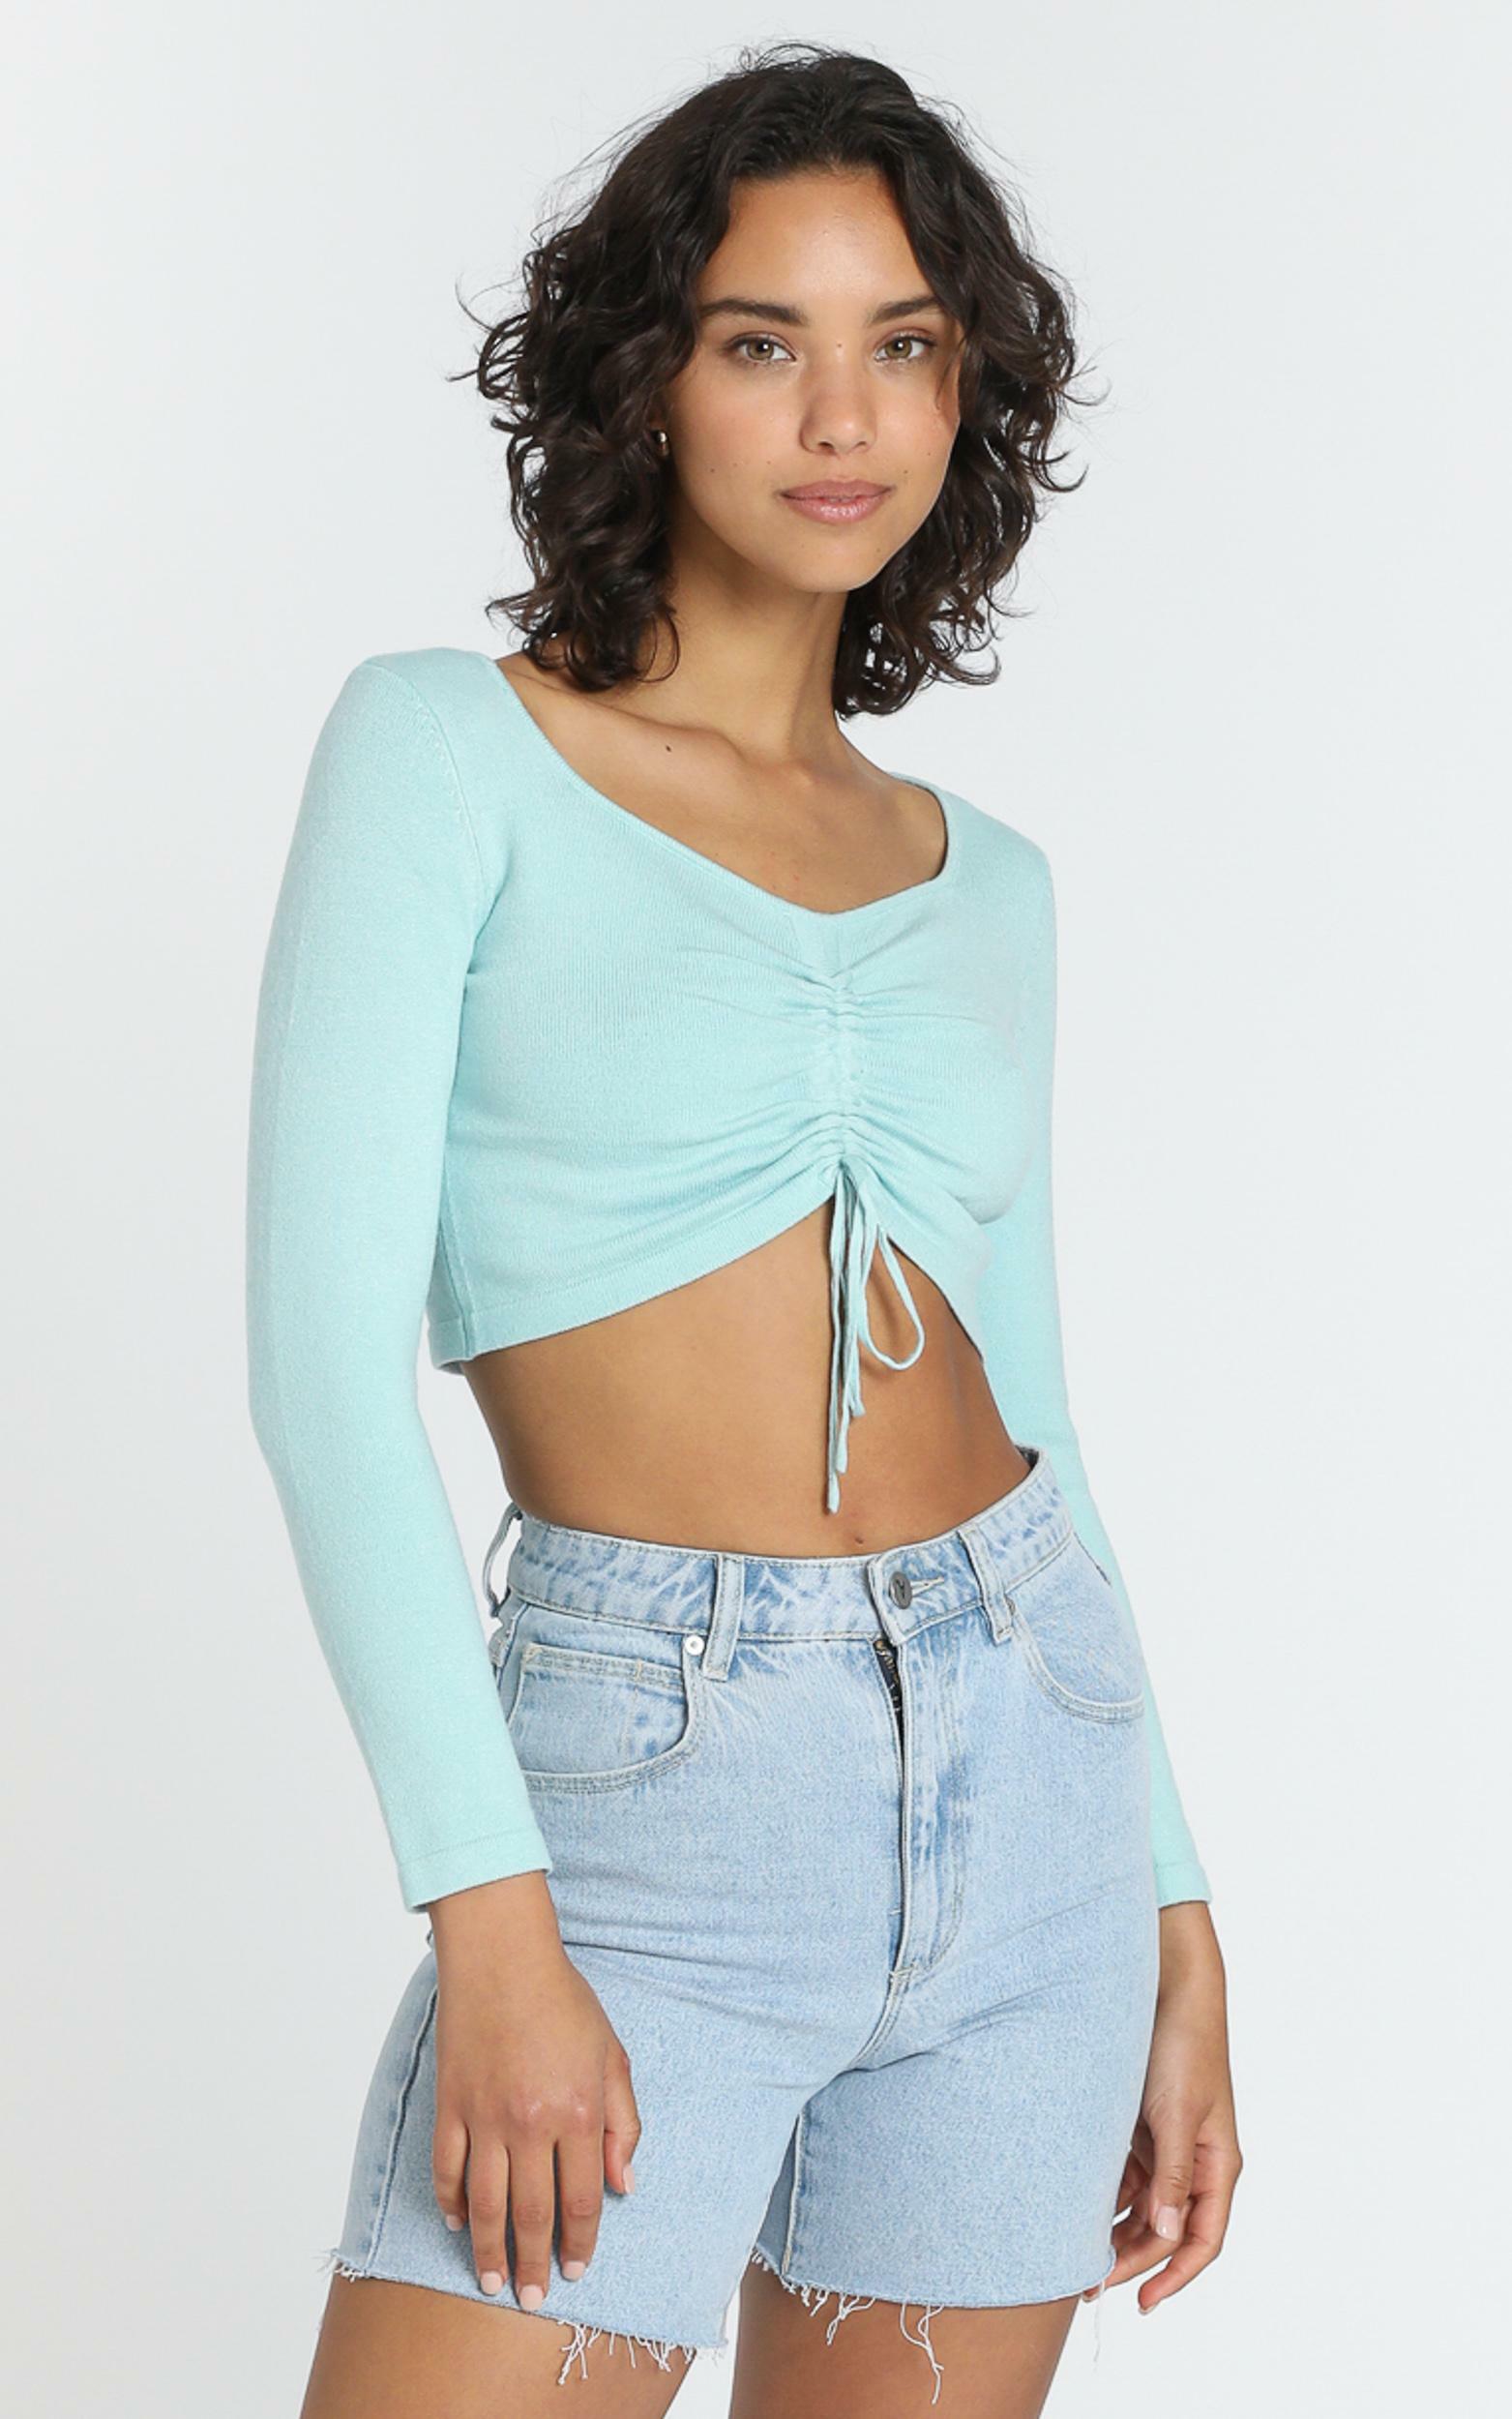 Dmitri Knit Top in Blue - 8 (S), Blue, hi-res image number null